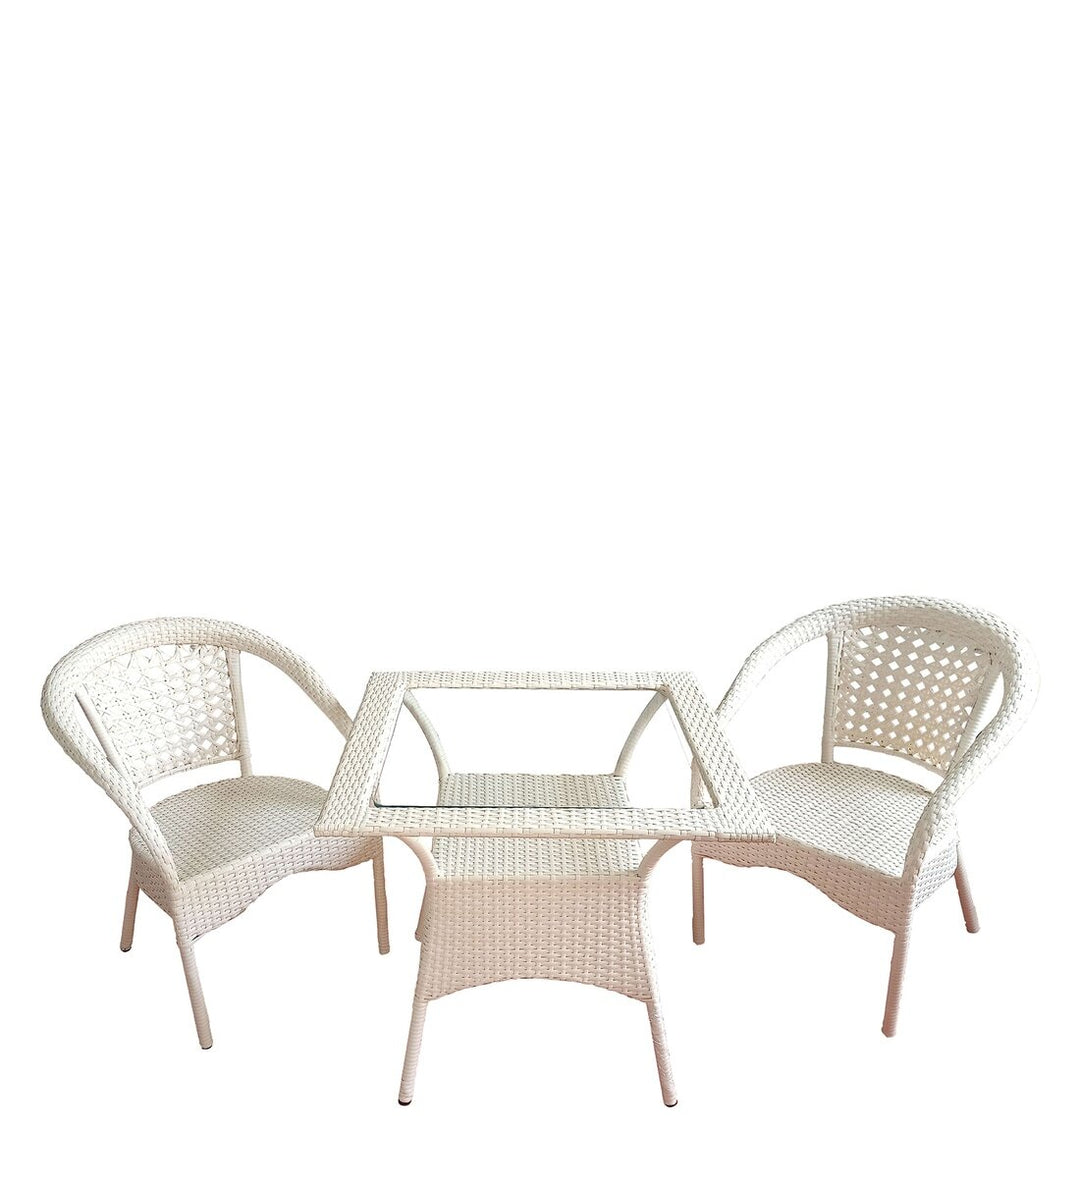 Romy Outdoor Patio Seating Set 2 Chairs and 1 Table Set (Cream)